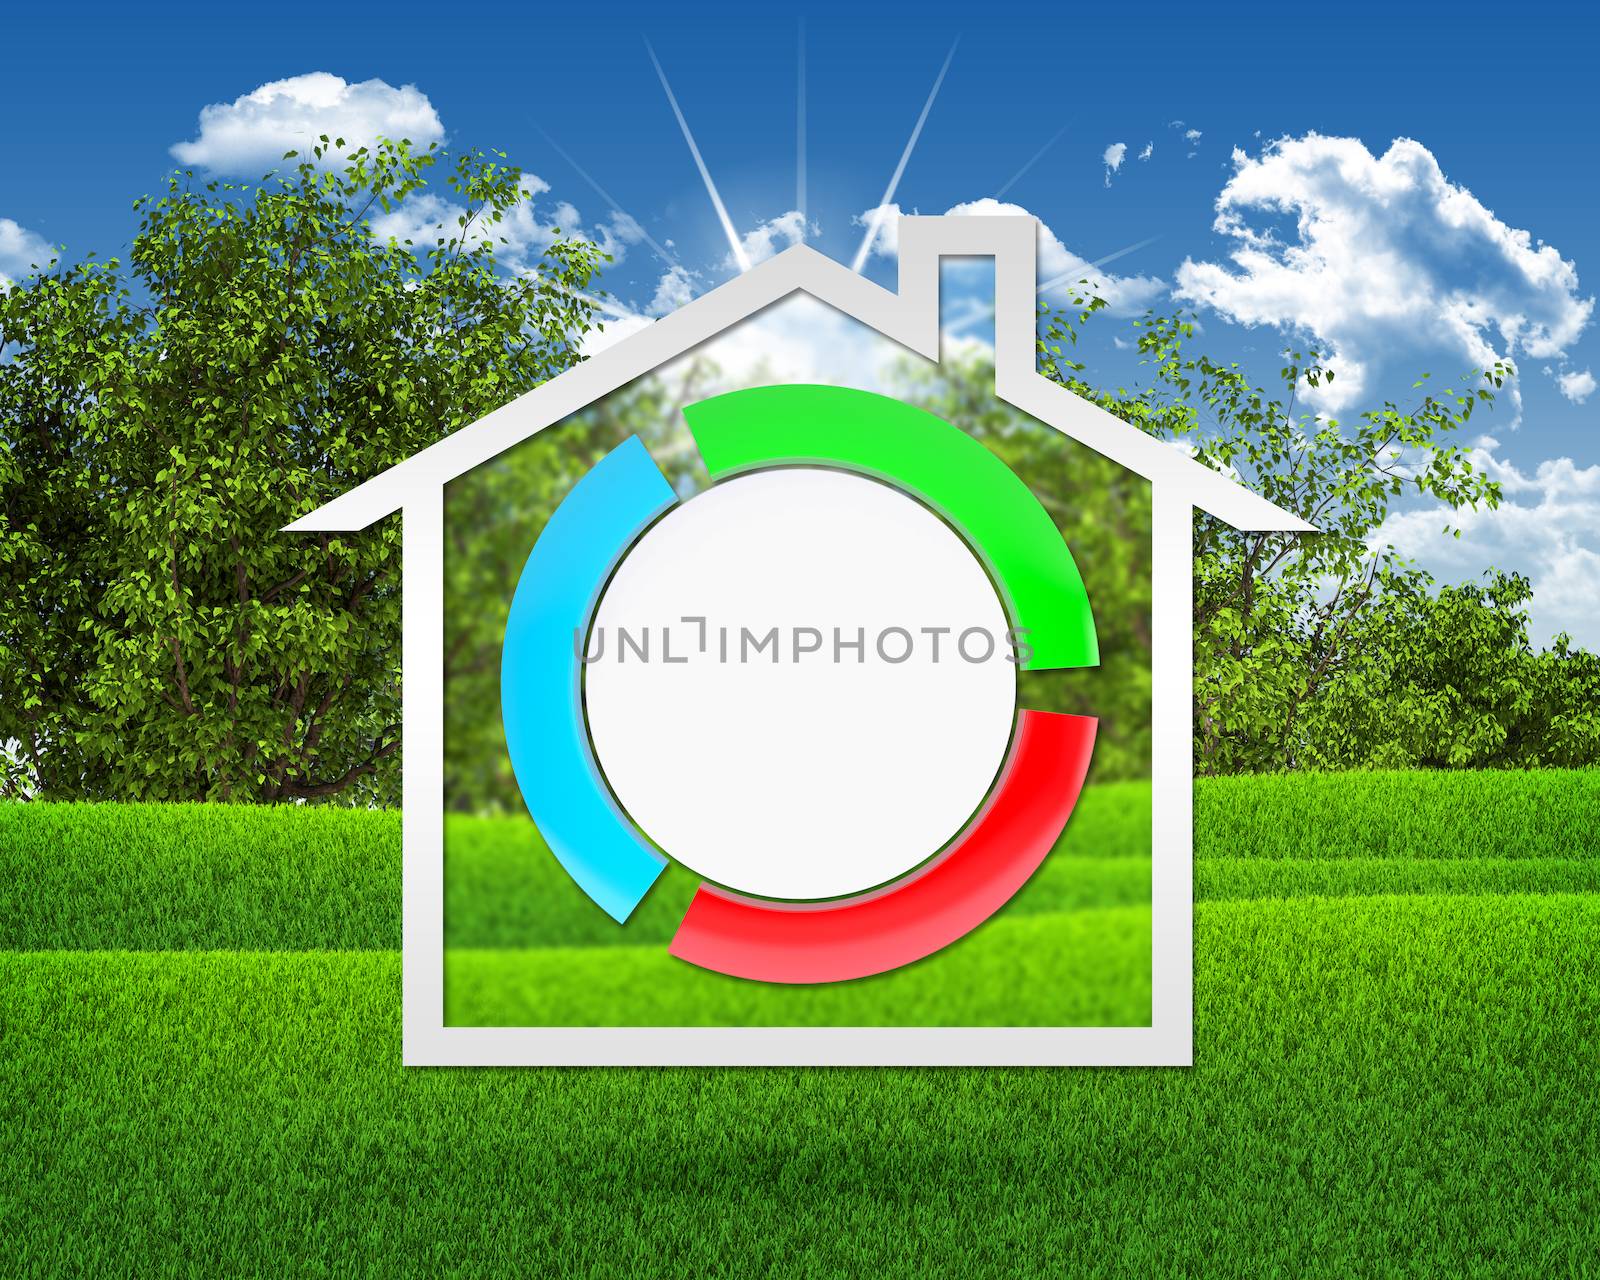 House icon and stylized button. Background of green grass and blue sky